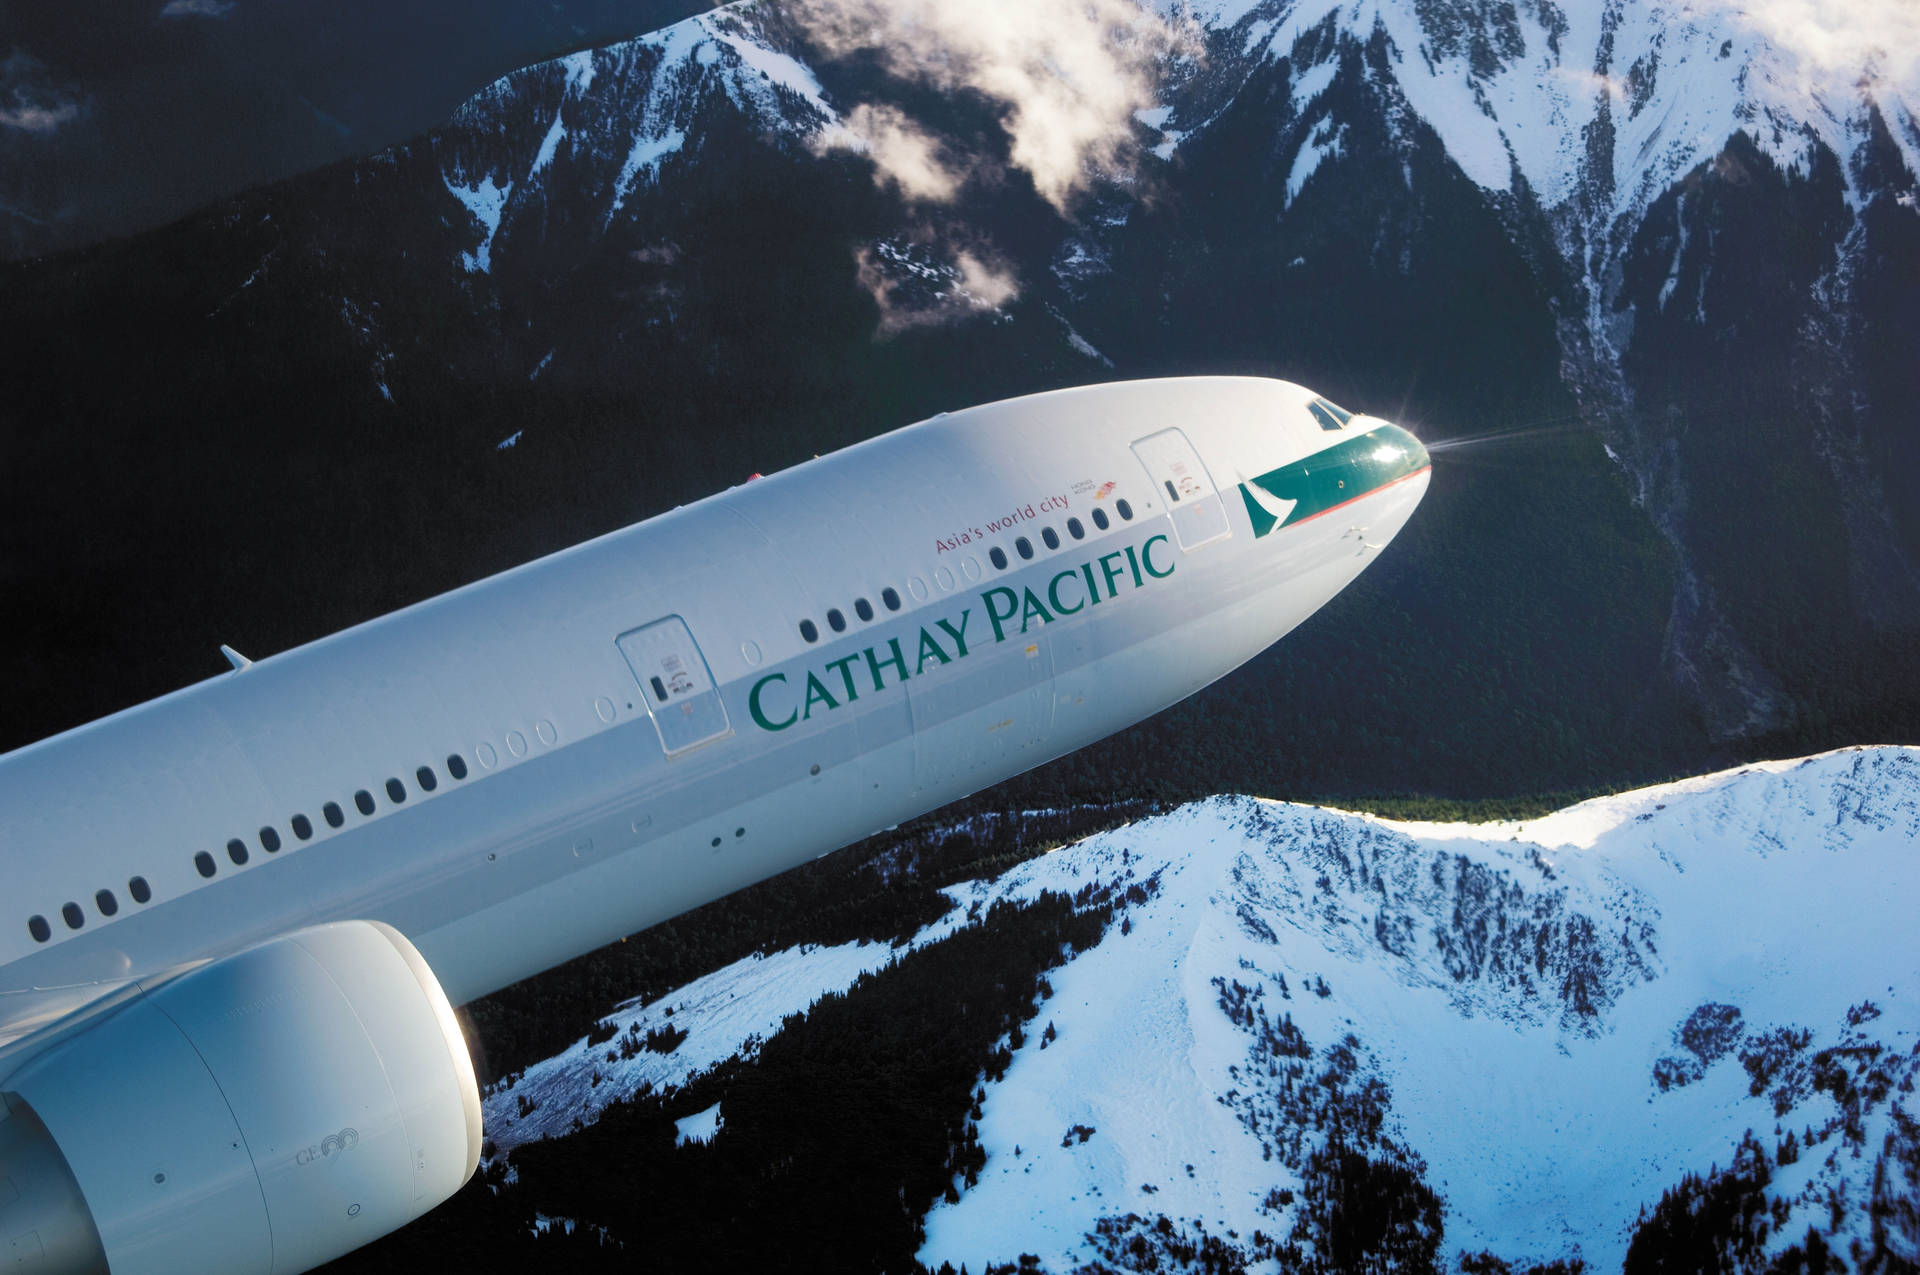 Caption: Cathay Pacific Jet over Snow-Capped Mountains Wallpaper